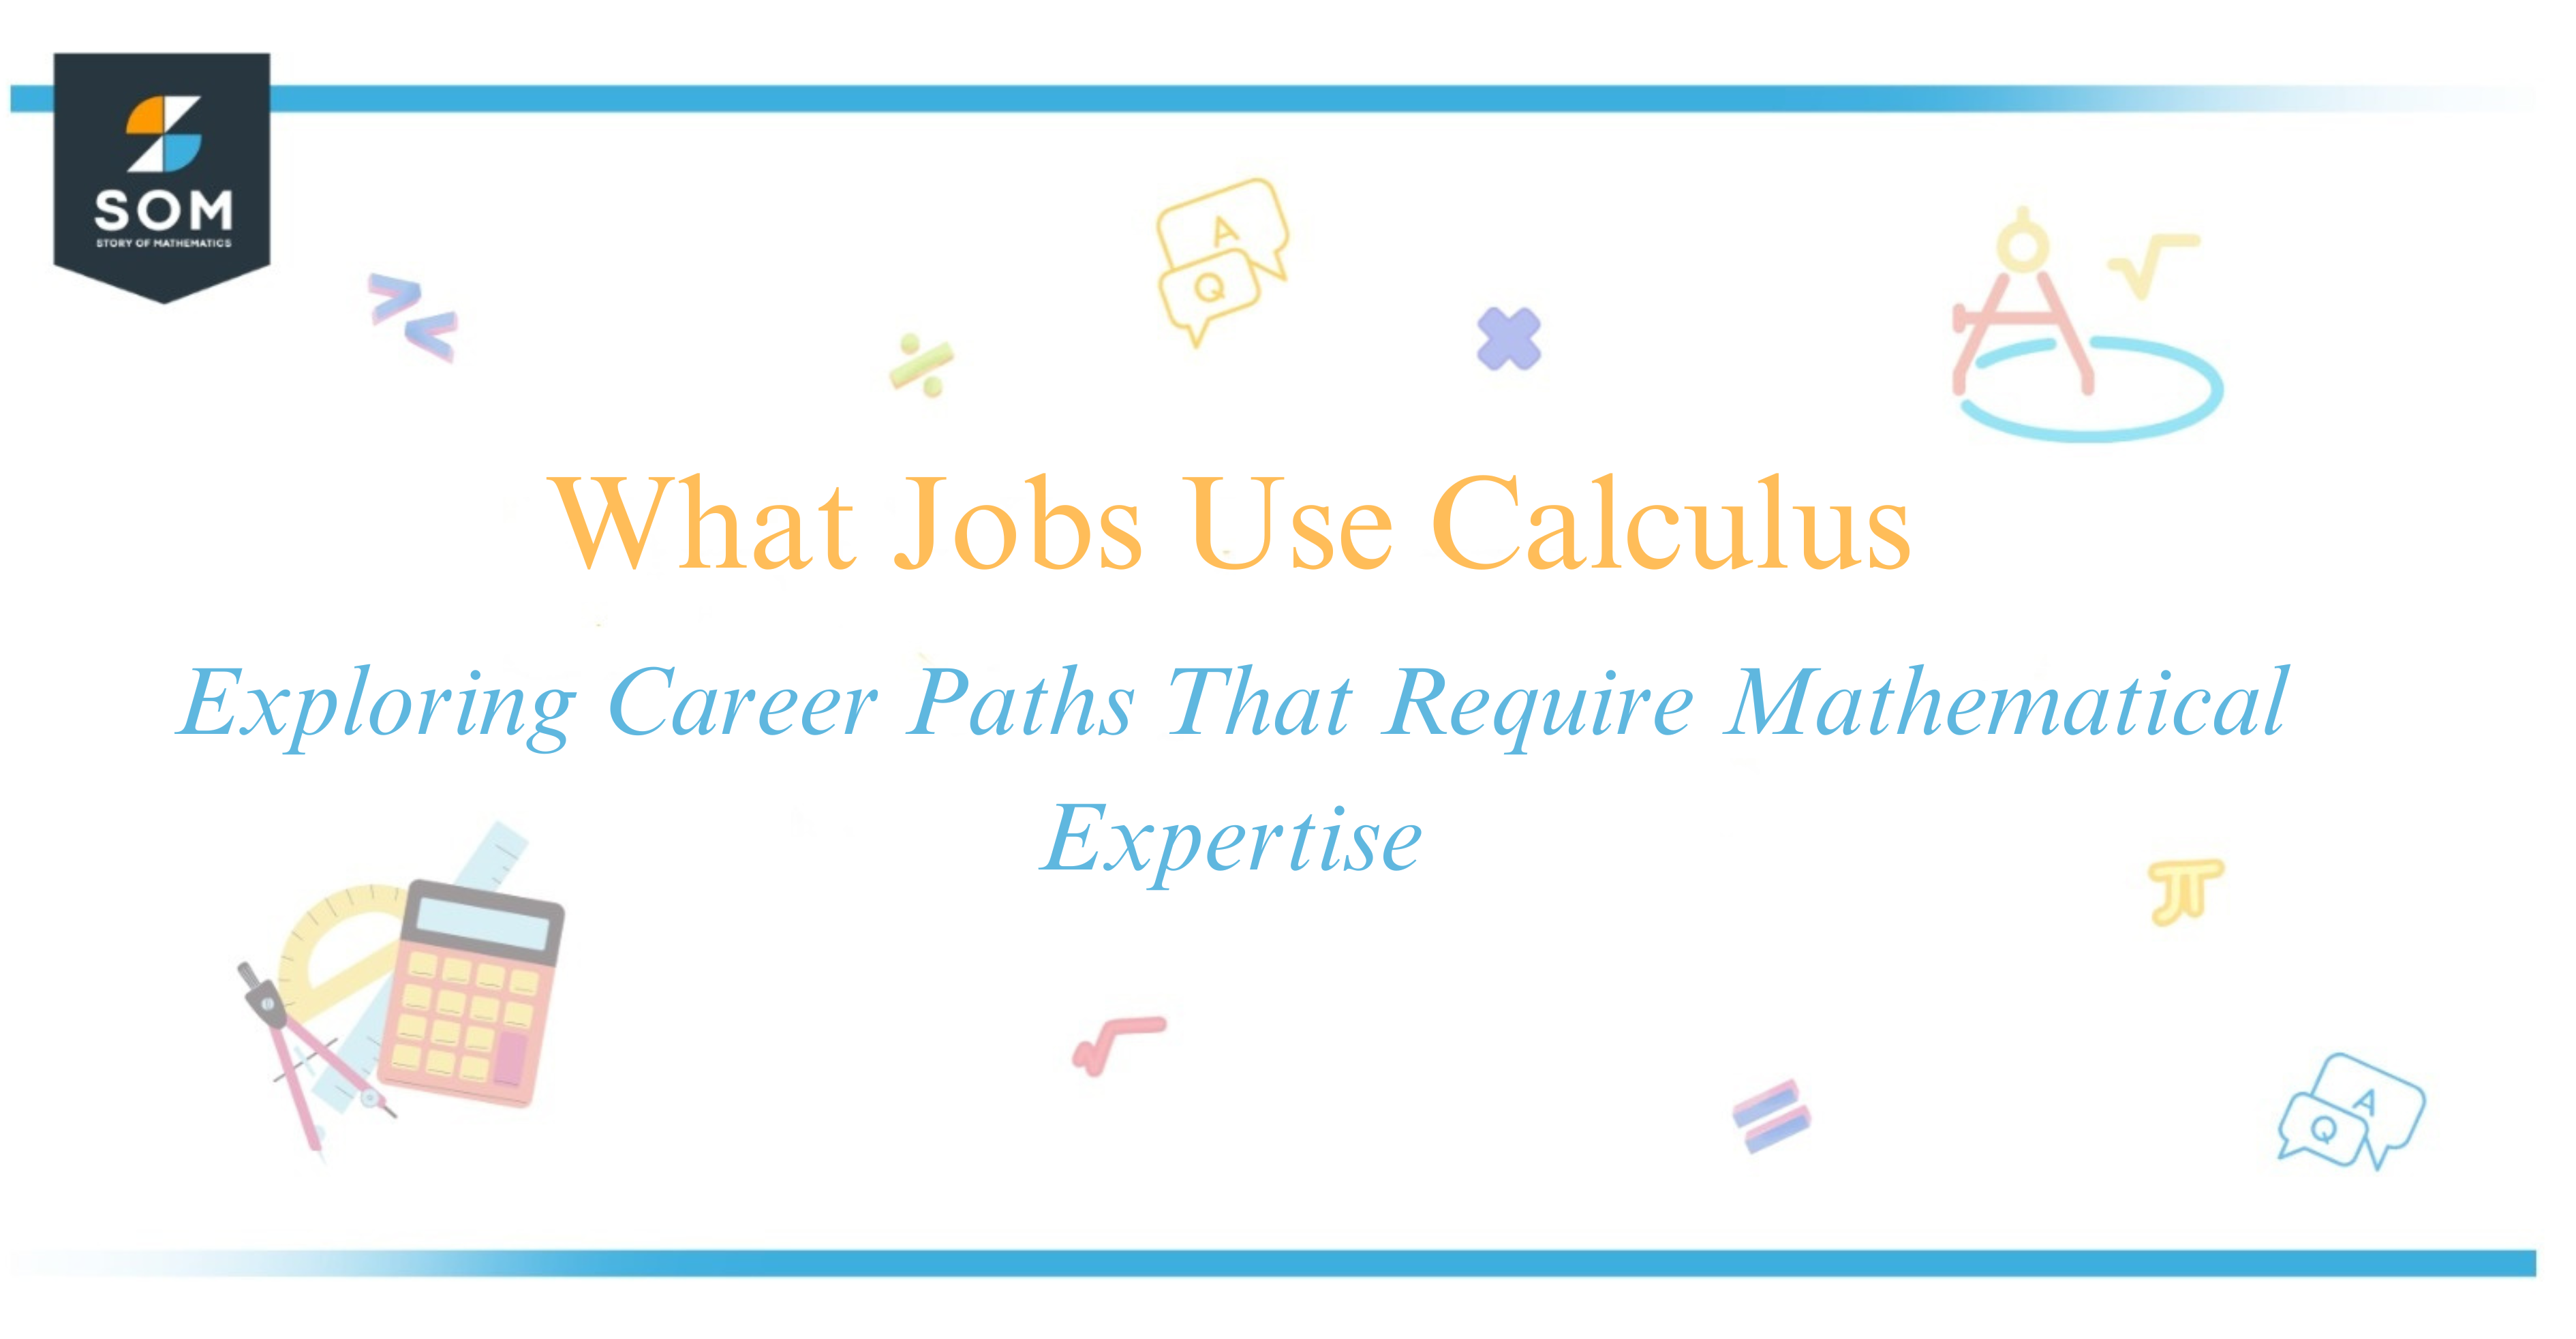 What Jobs Use Calculus Exploring Career Paths That Require Mathematical Expertise